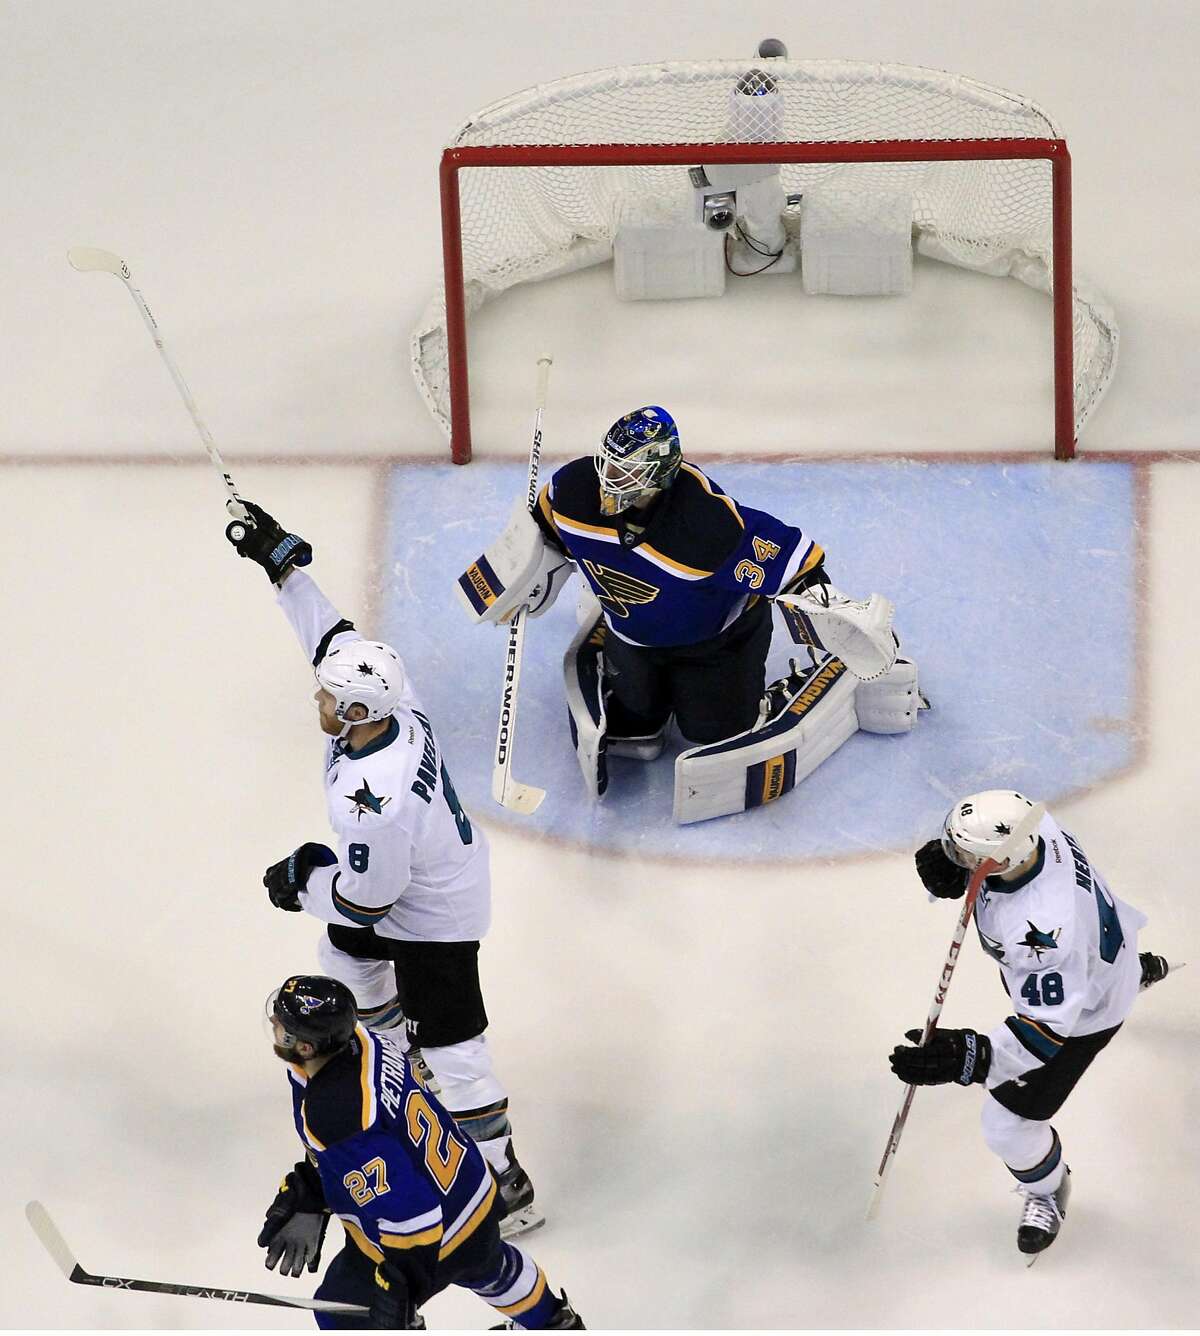 San Jose Sharks center Joe Pavelski (8) celebrates after scoring a goal against St. Louis Blues goalie Jake Allen (34) during the third period in Game 5 of the NHL hockey Stanley Cup Western Conference finals, Monday, May 23, 2016, in St. Louis. (AP Photo/Jeff Roberson)